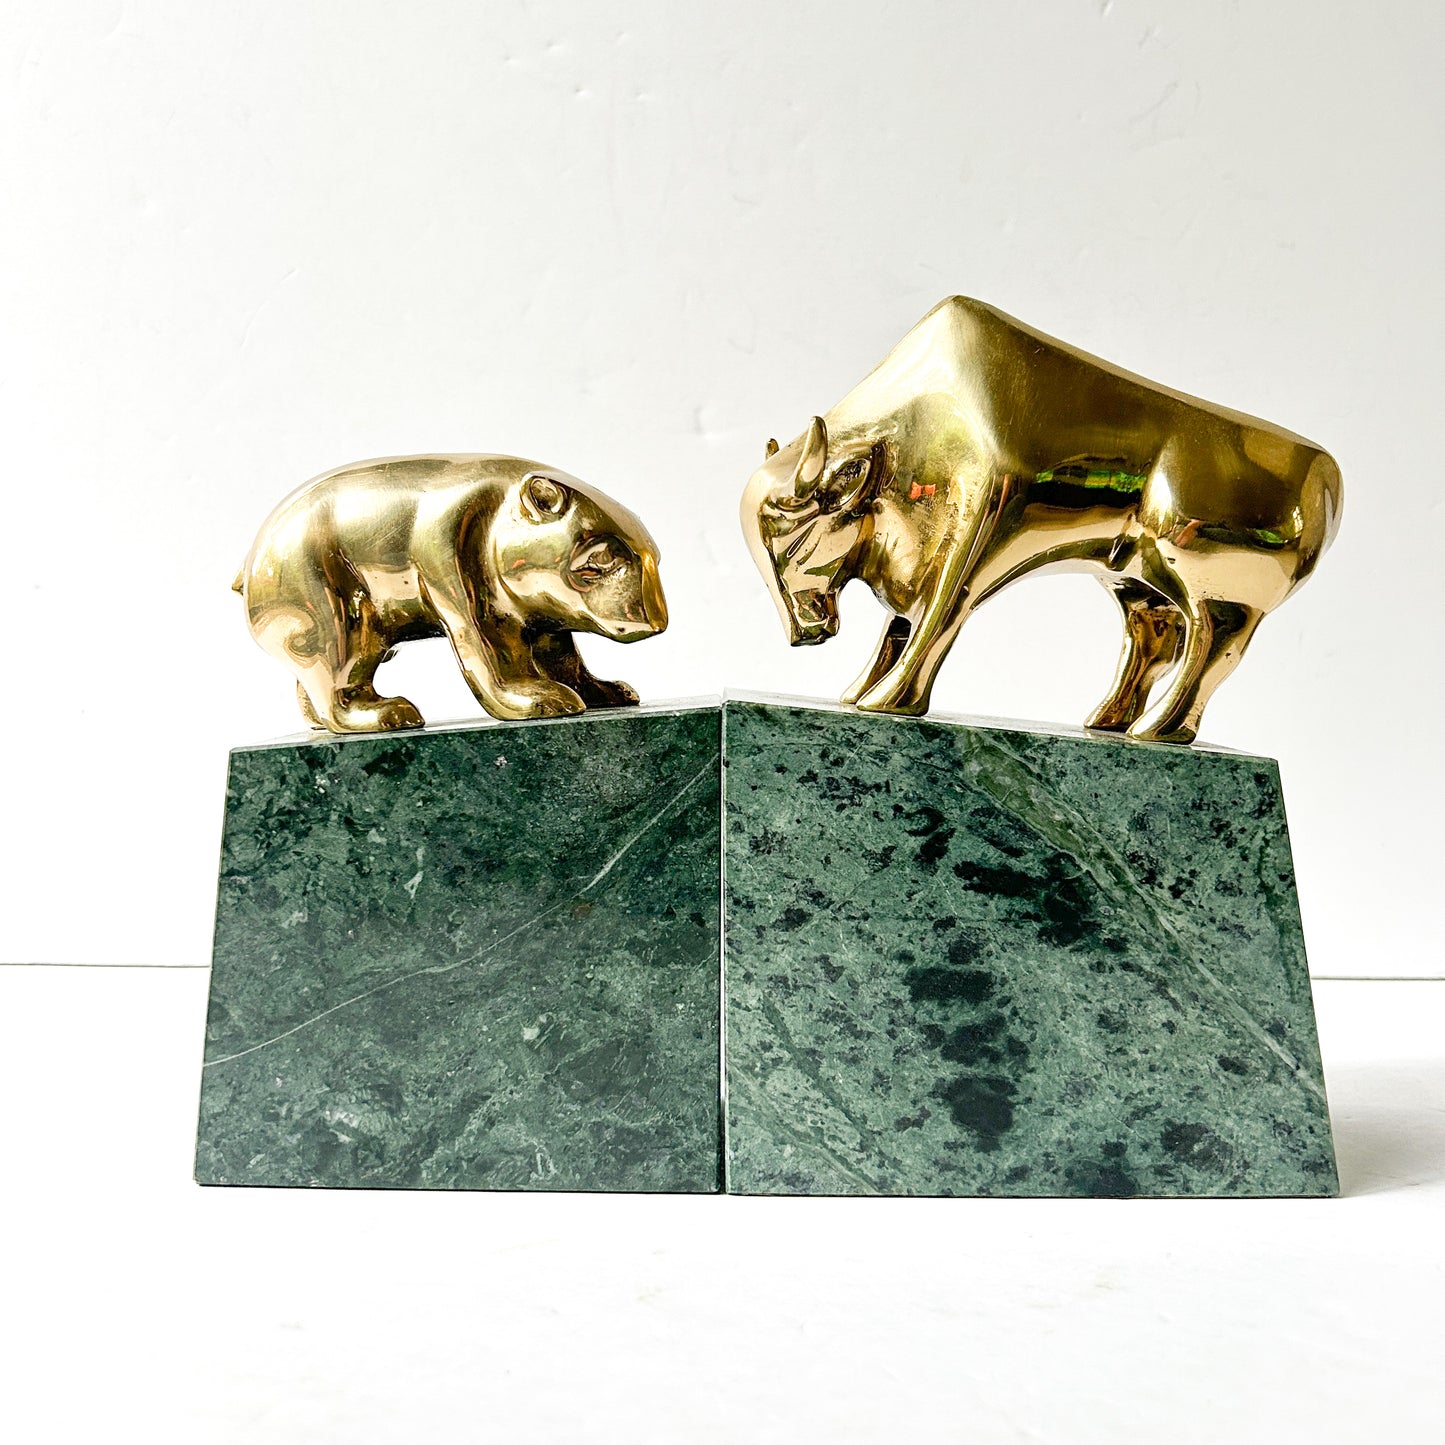 Vintage Brass Bull and Bear Bookends on Marble, Heavy Stock Market Themed Office Decor